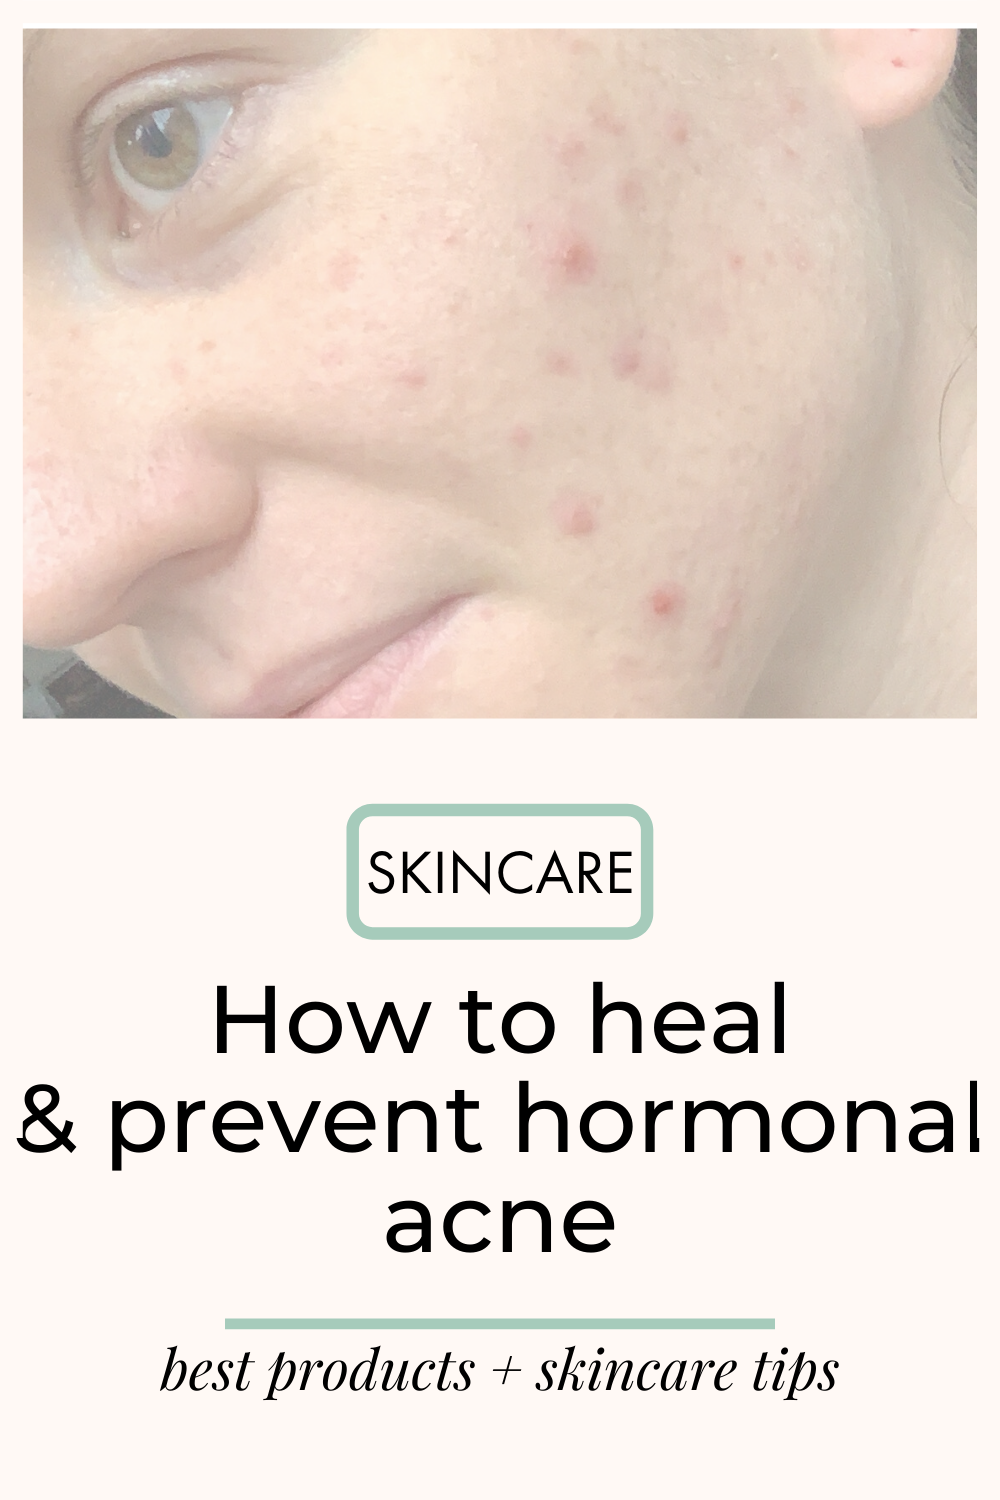 I spent 6 months experimenting with products to heal cystic acne ...